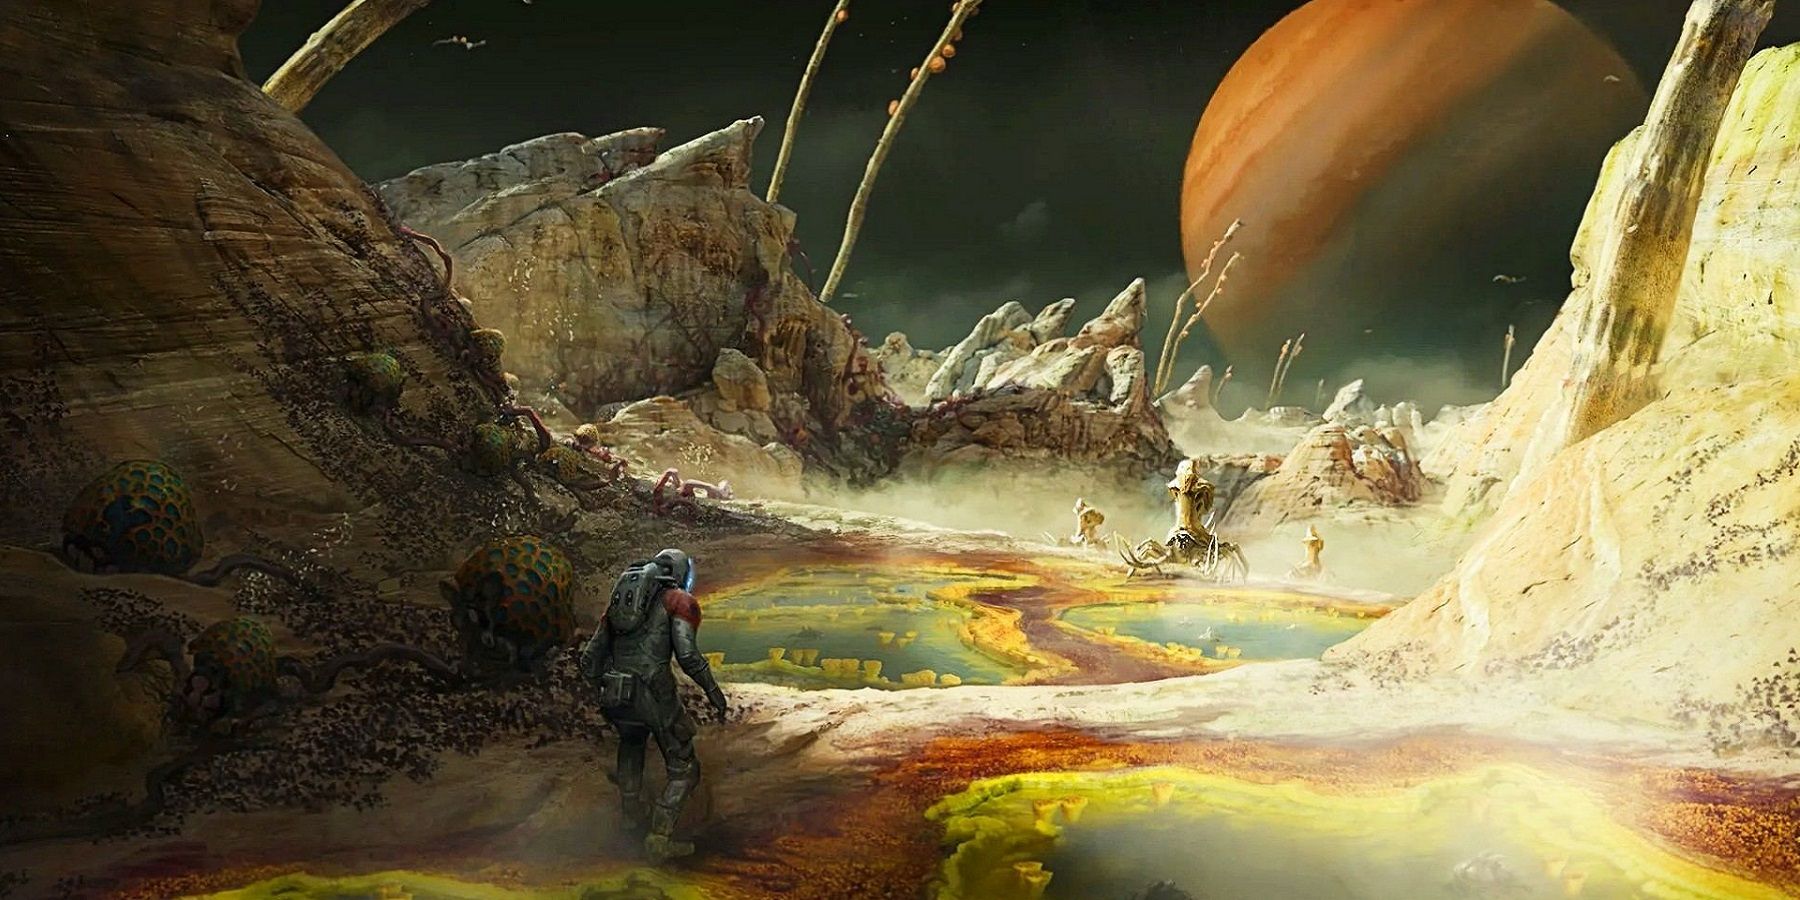 Image from Starfield showing an astronaut on a desolate planet with another planet looming in the background.